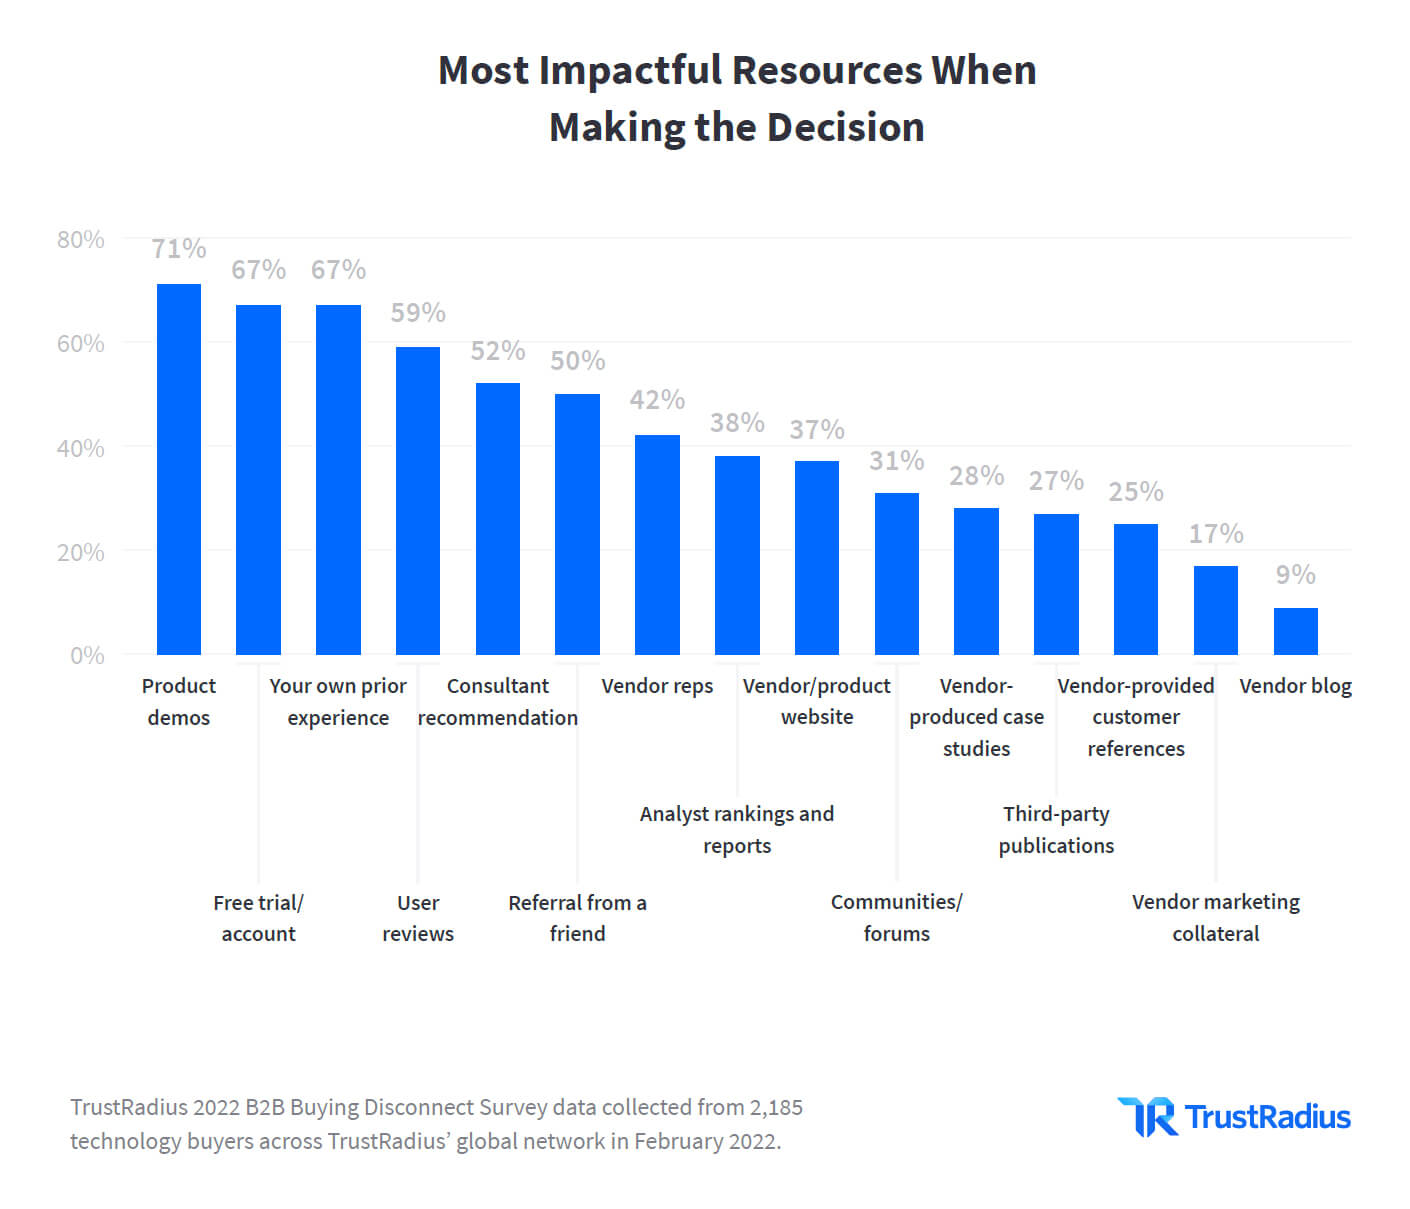 Most impactful resources when making a decison